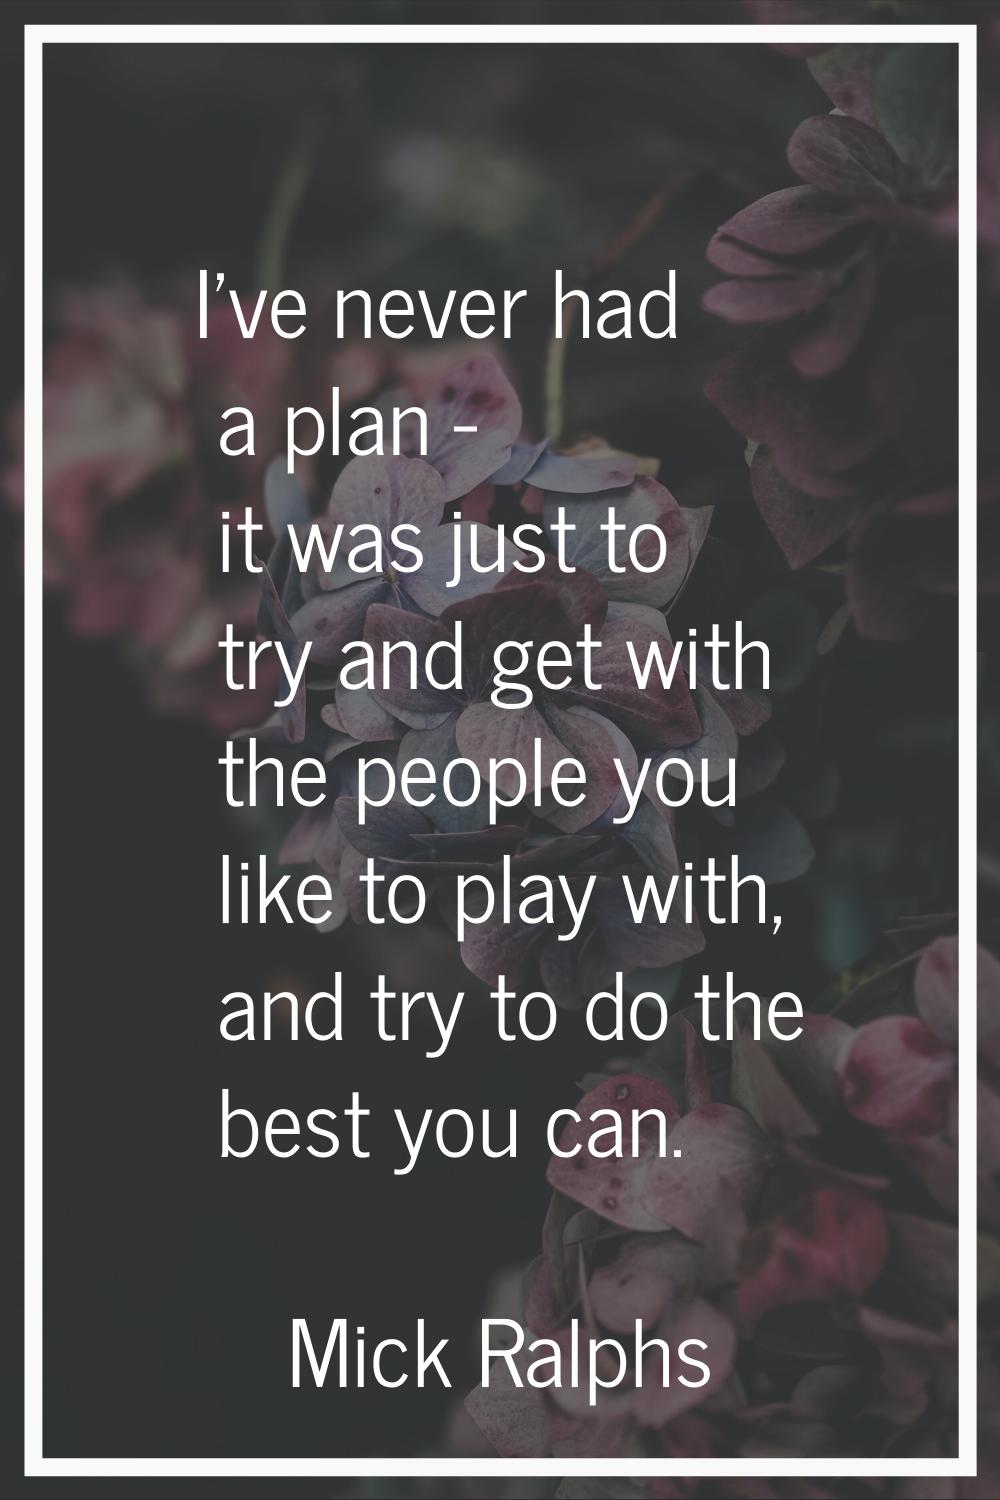 I've never had a plan - it was just to try and get with the people you like to play with, and try t